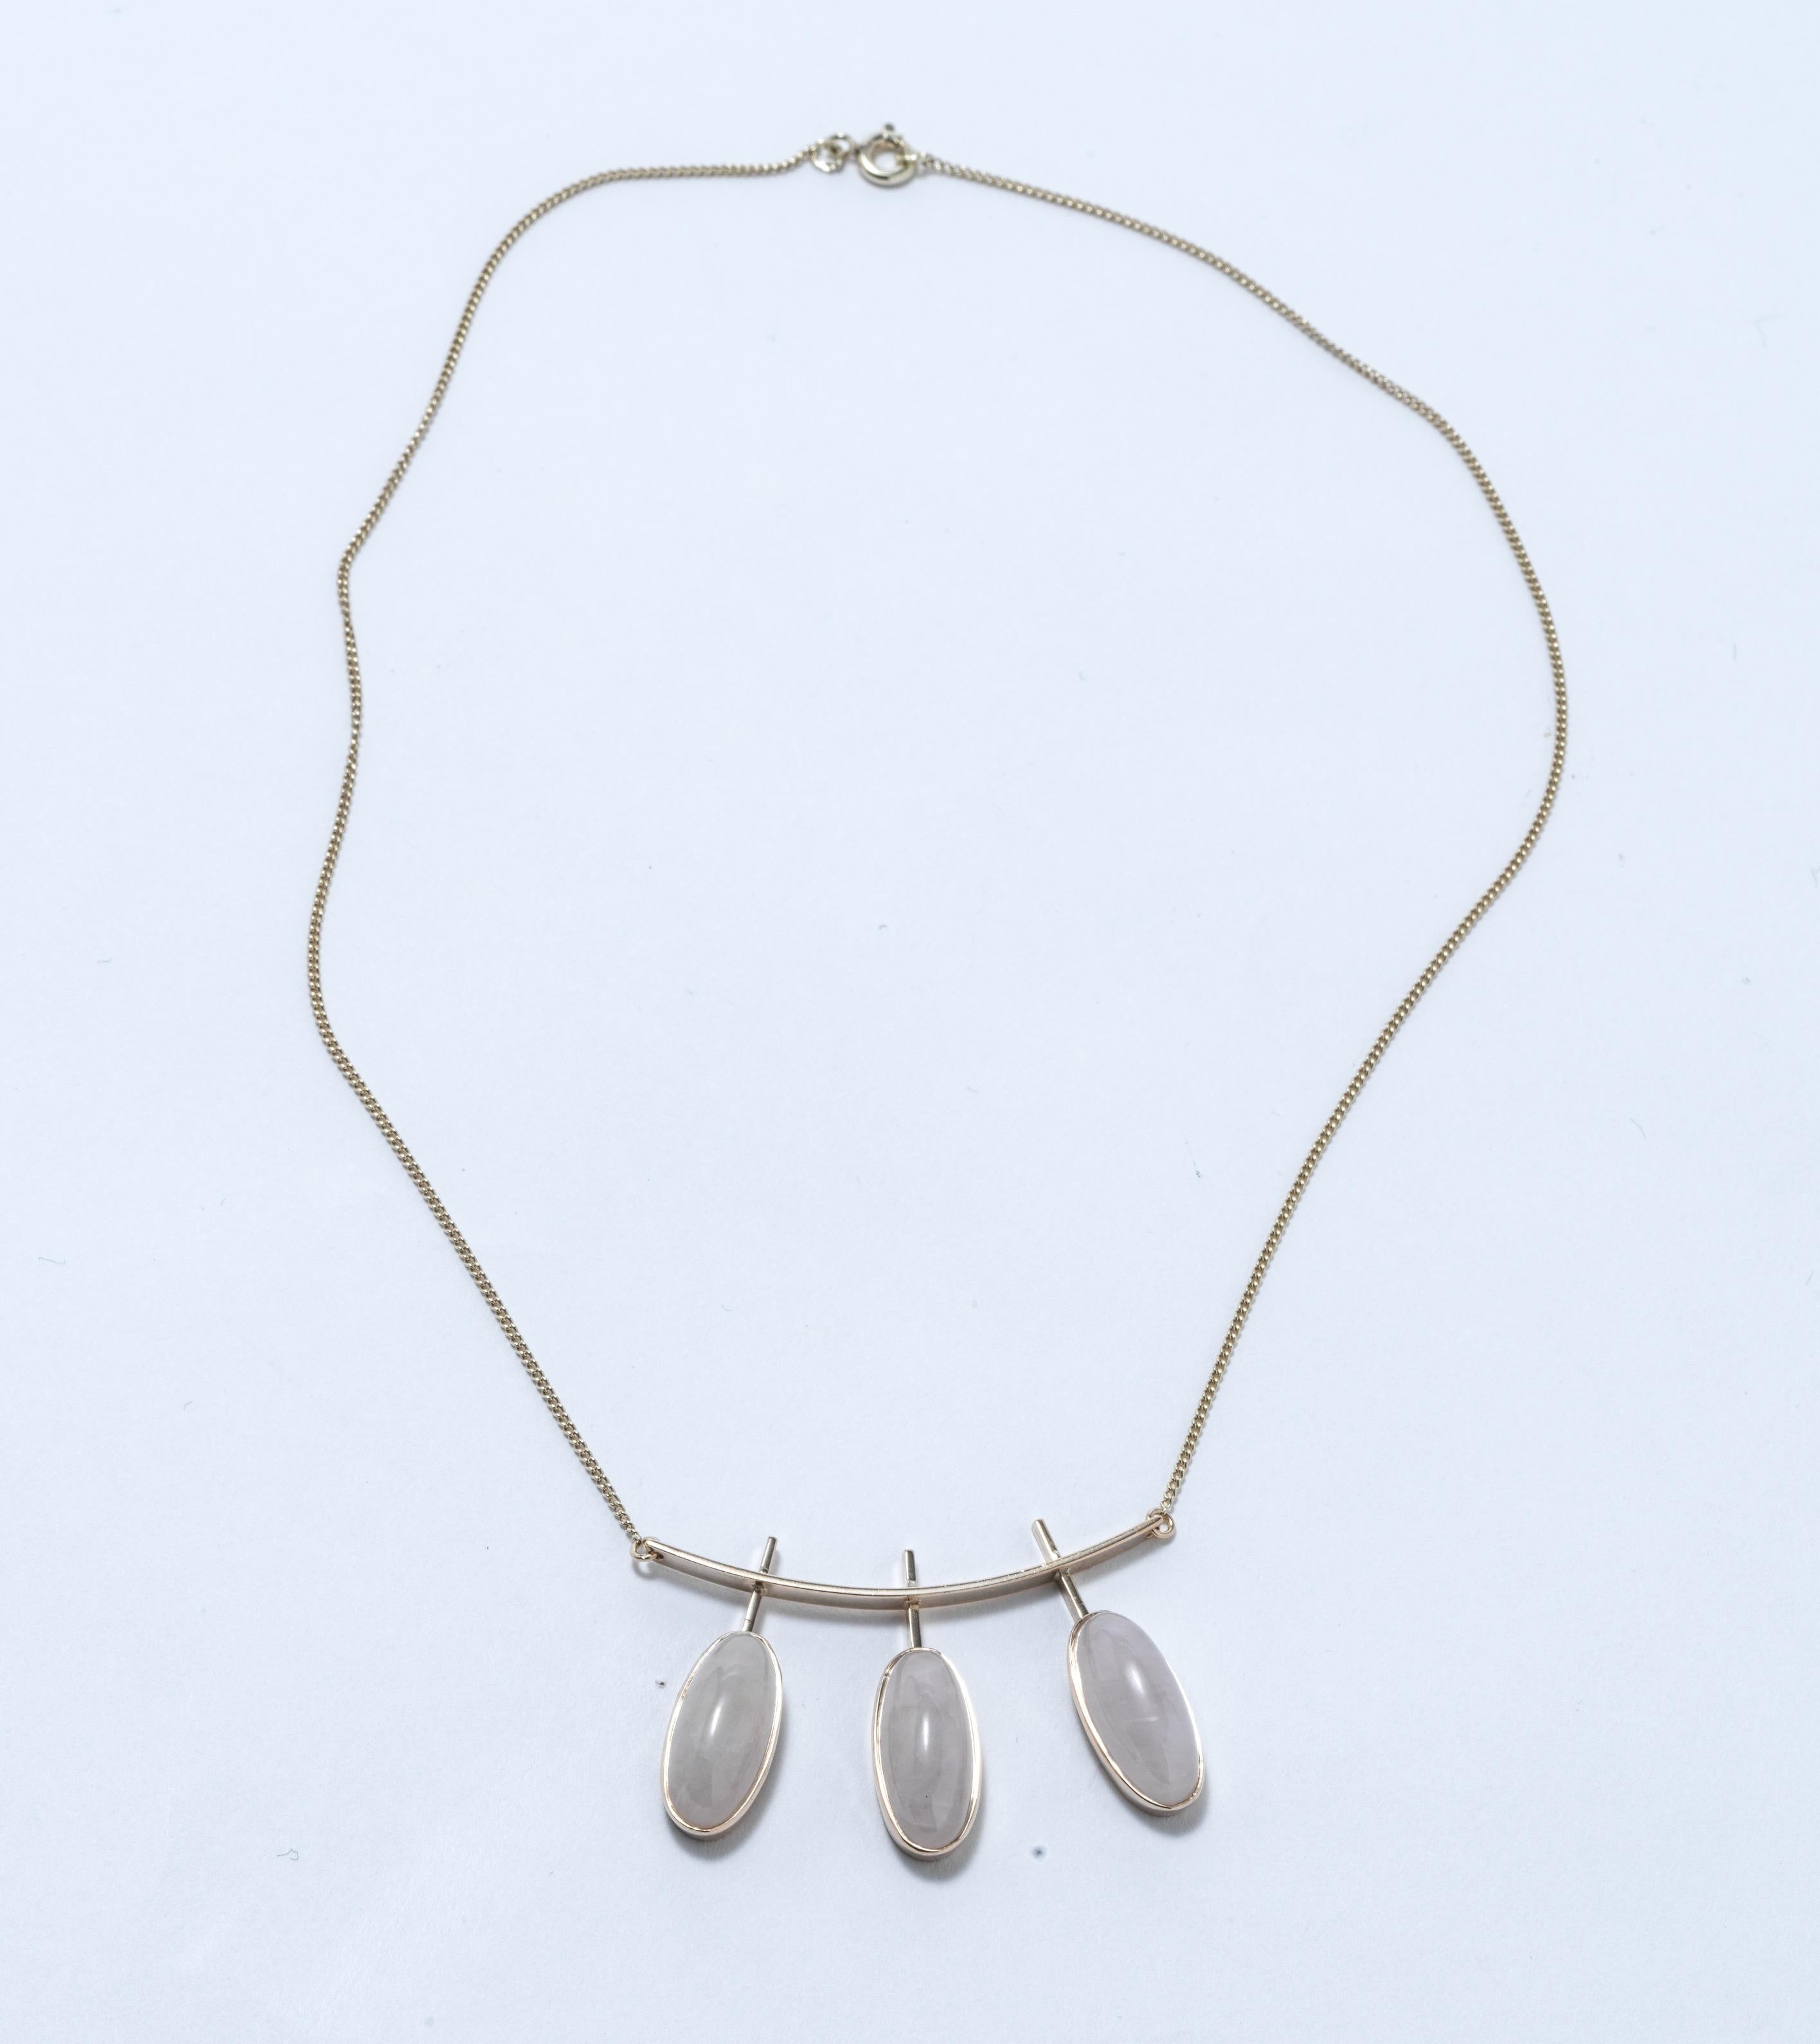 A charming gold necklace made in 1959 by the Finnish goldsmith master Eero Eskelinen. It is made of 14 k gold with three oval cut milk quartz stones set in gold frames.  The design is light and has an airy feeling to it. This is a necklace you can